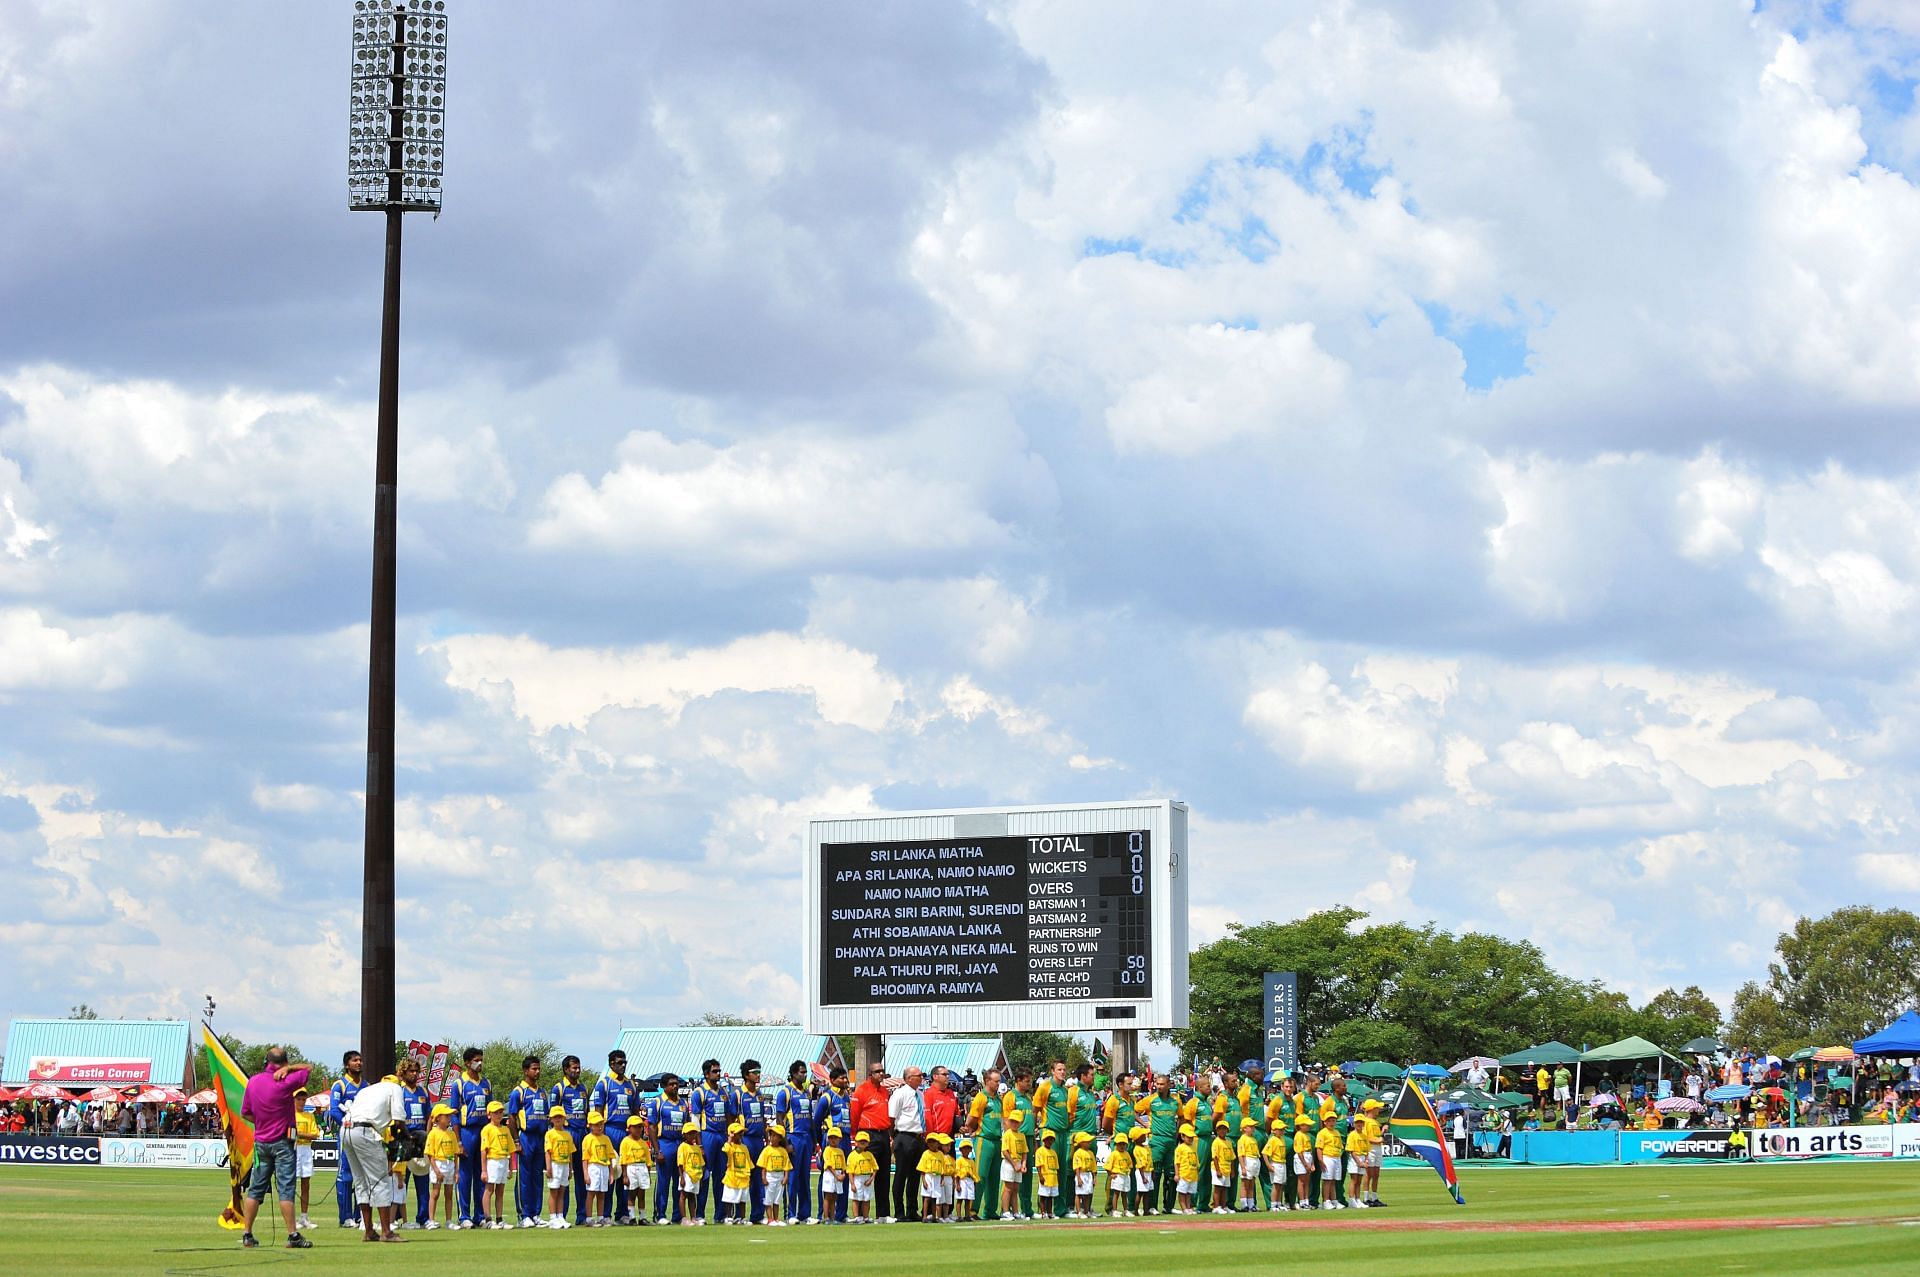 The Diamond Oval in Kimberley will host the first semi-final